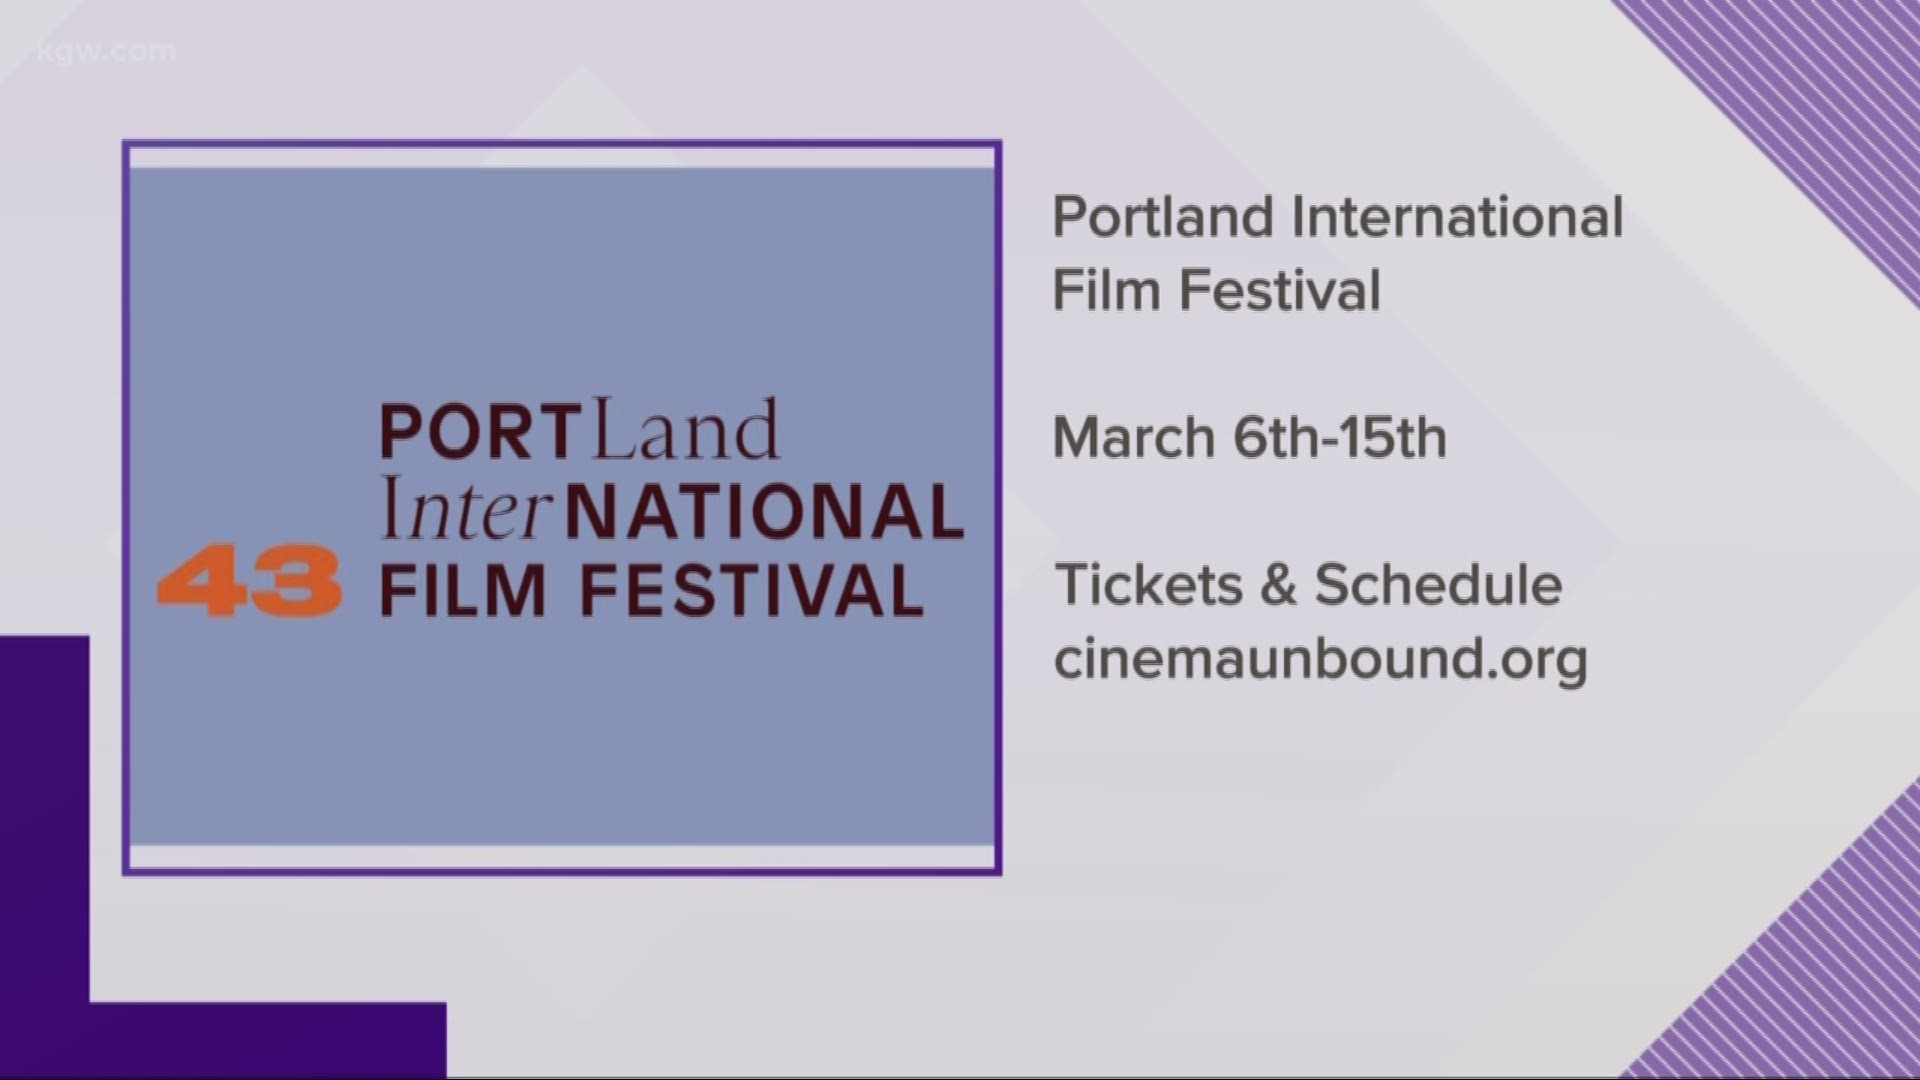 The Portland International Film Festival is expanding its offerings with podcasts, live performances and films.
cinemaunbound.org